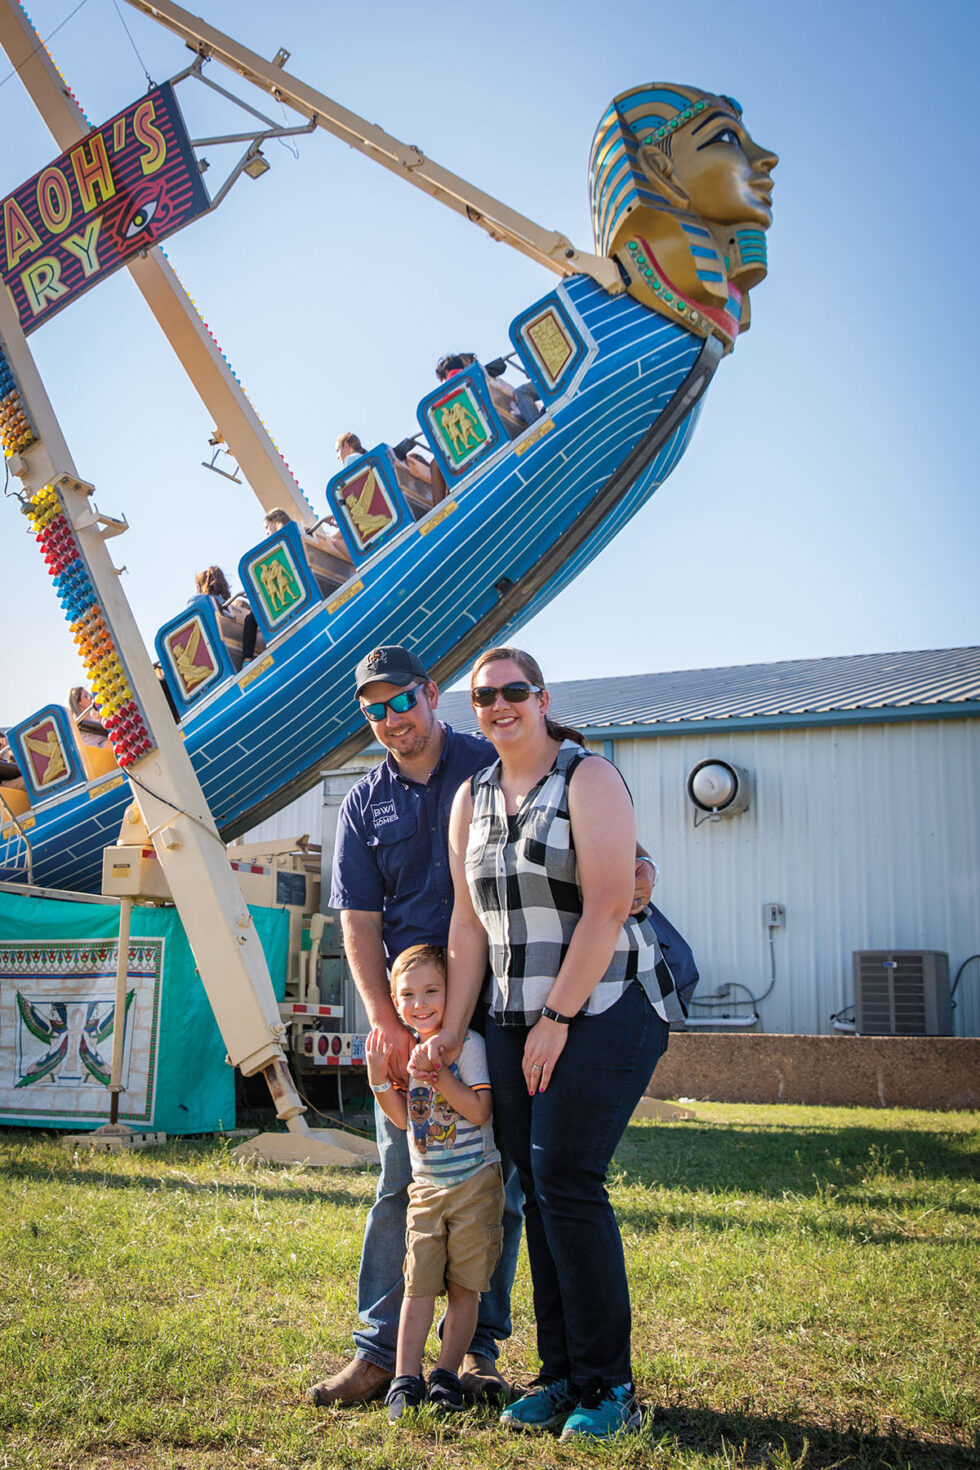 The Mighty Thomas Carnival Brings Joy to Small Town Texas